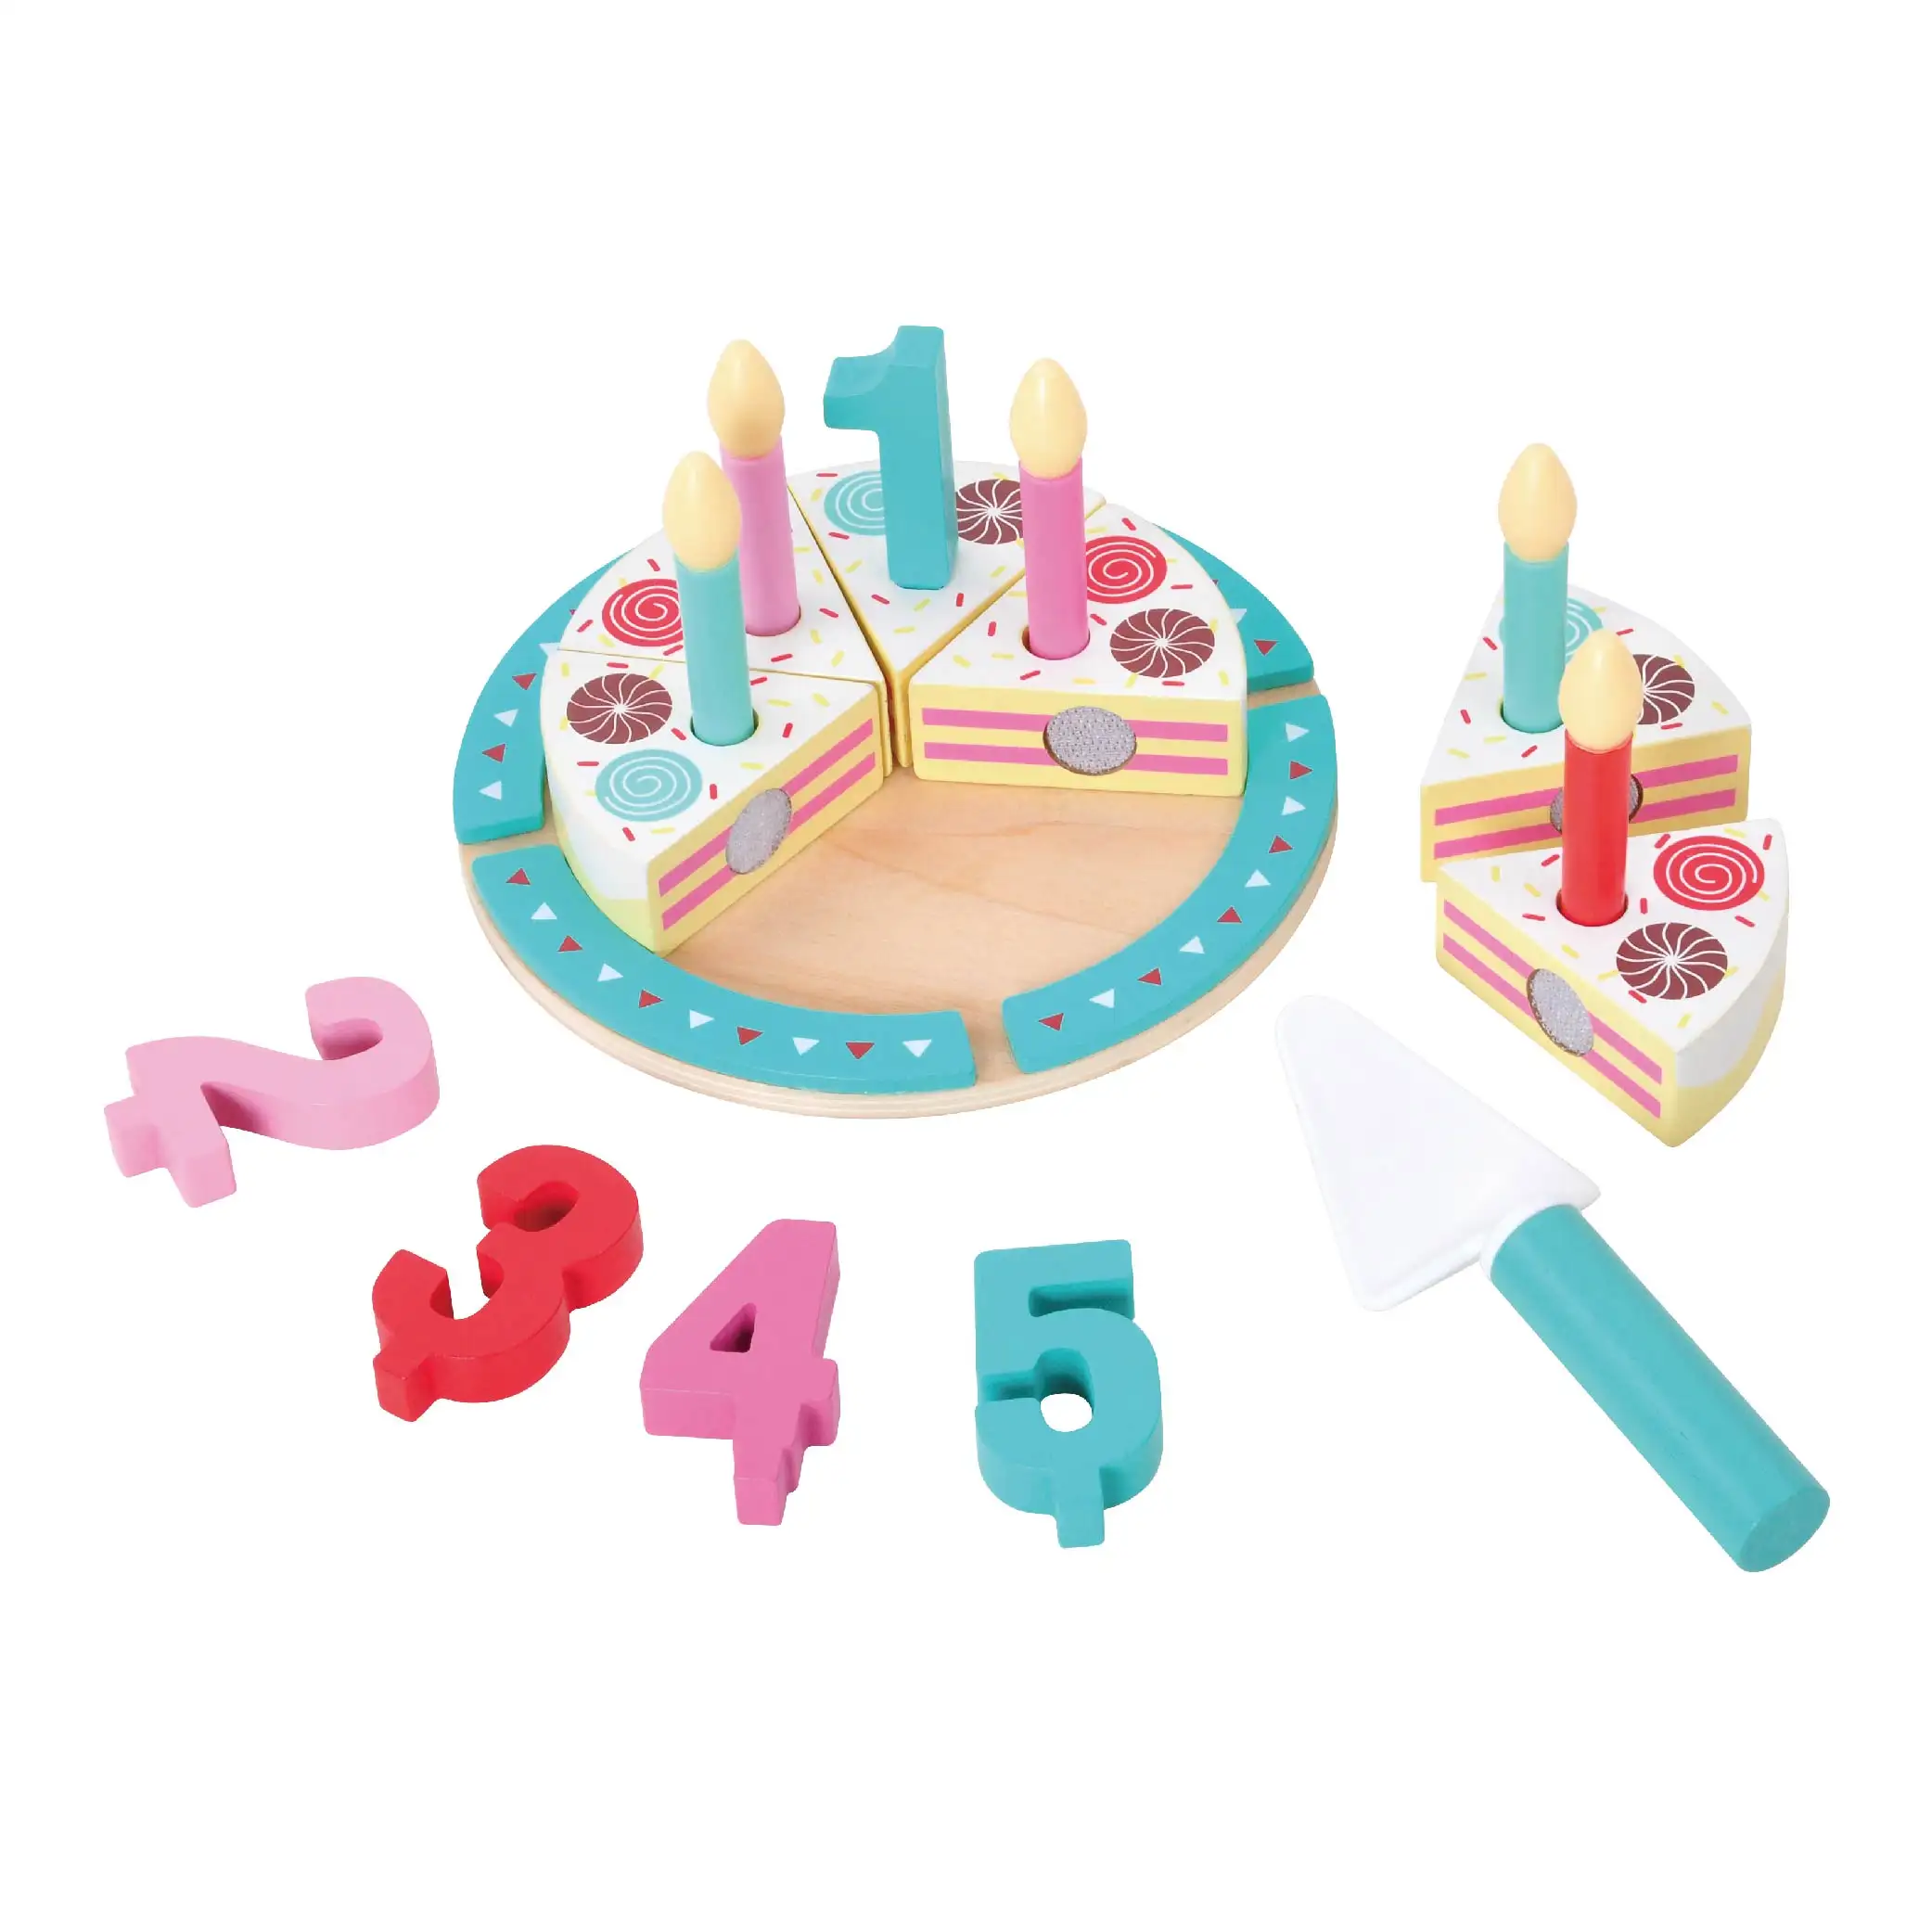 High Qualify Little Girl Educational Happy Kinder Spielzeug Wooden Toys Birthday Cake For Children